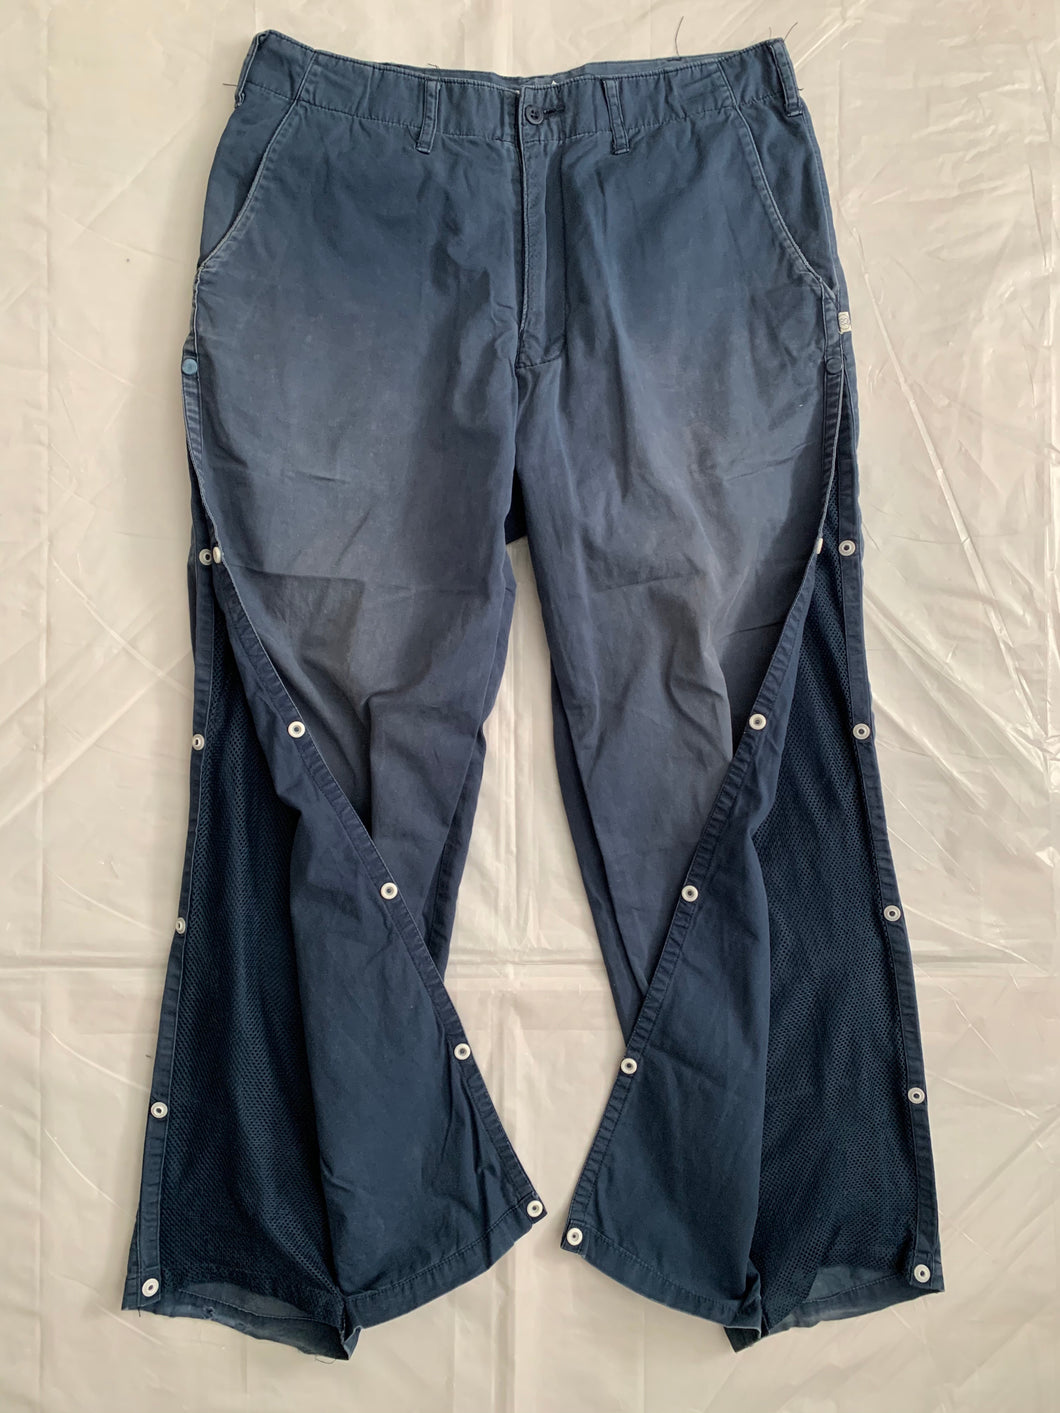 2000s Goodenough Ventilated Mesh Side Snap Seam Pants - Size S